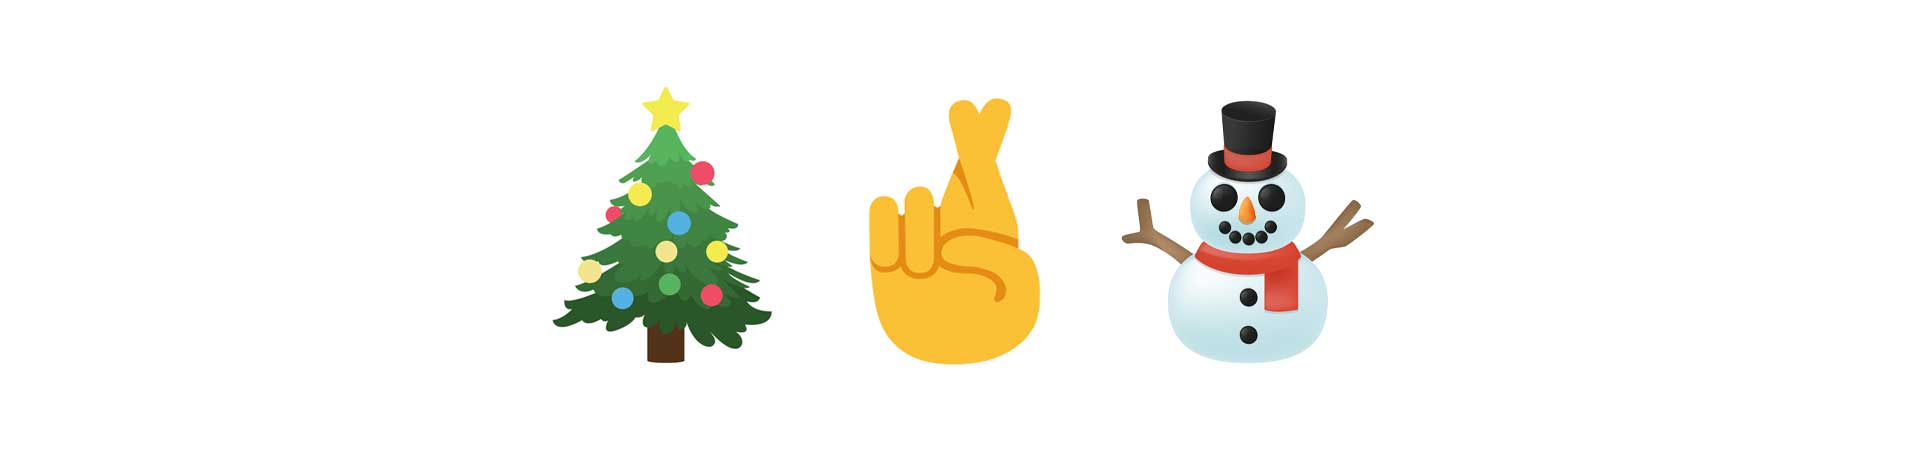 A Christmas tree, fingers crossed emoji and a snowman